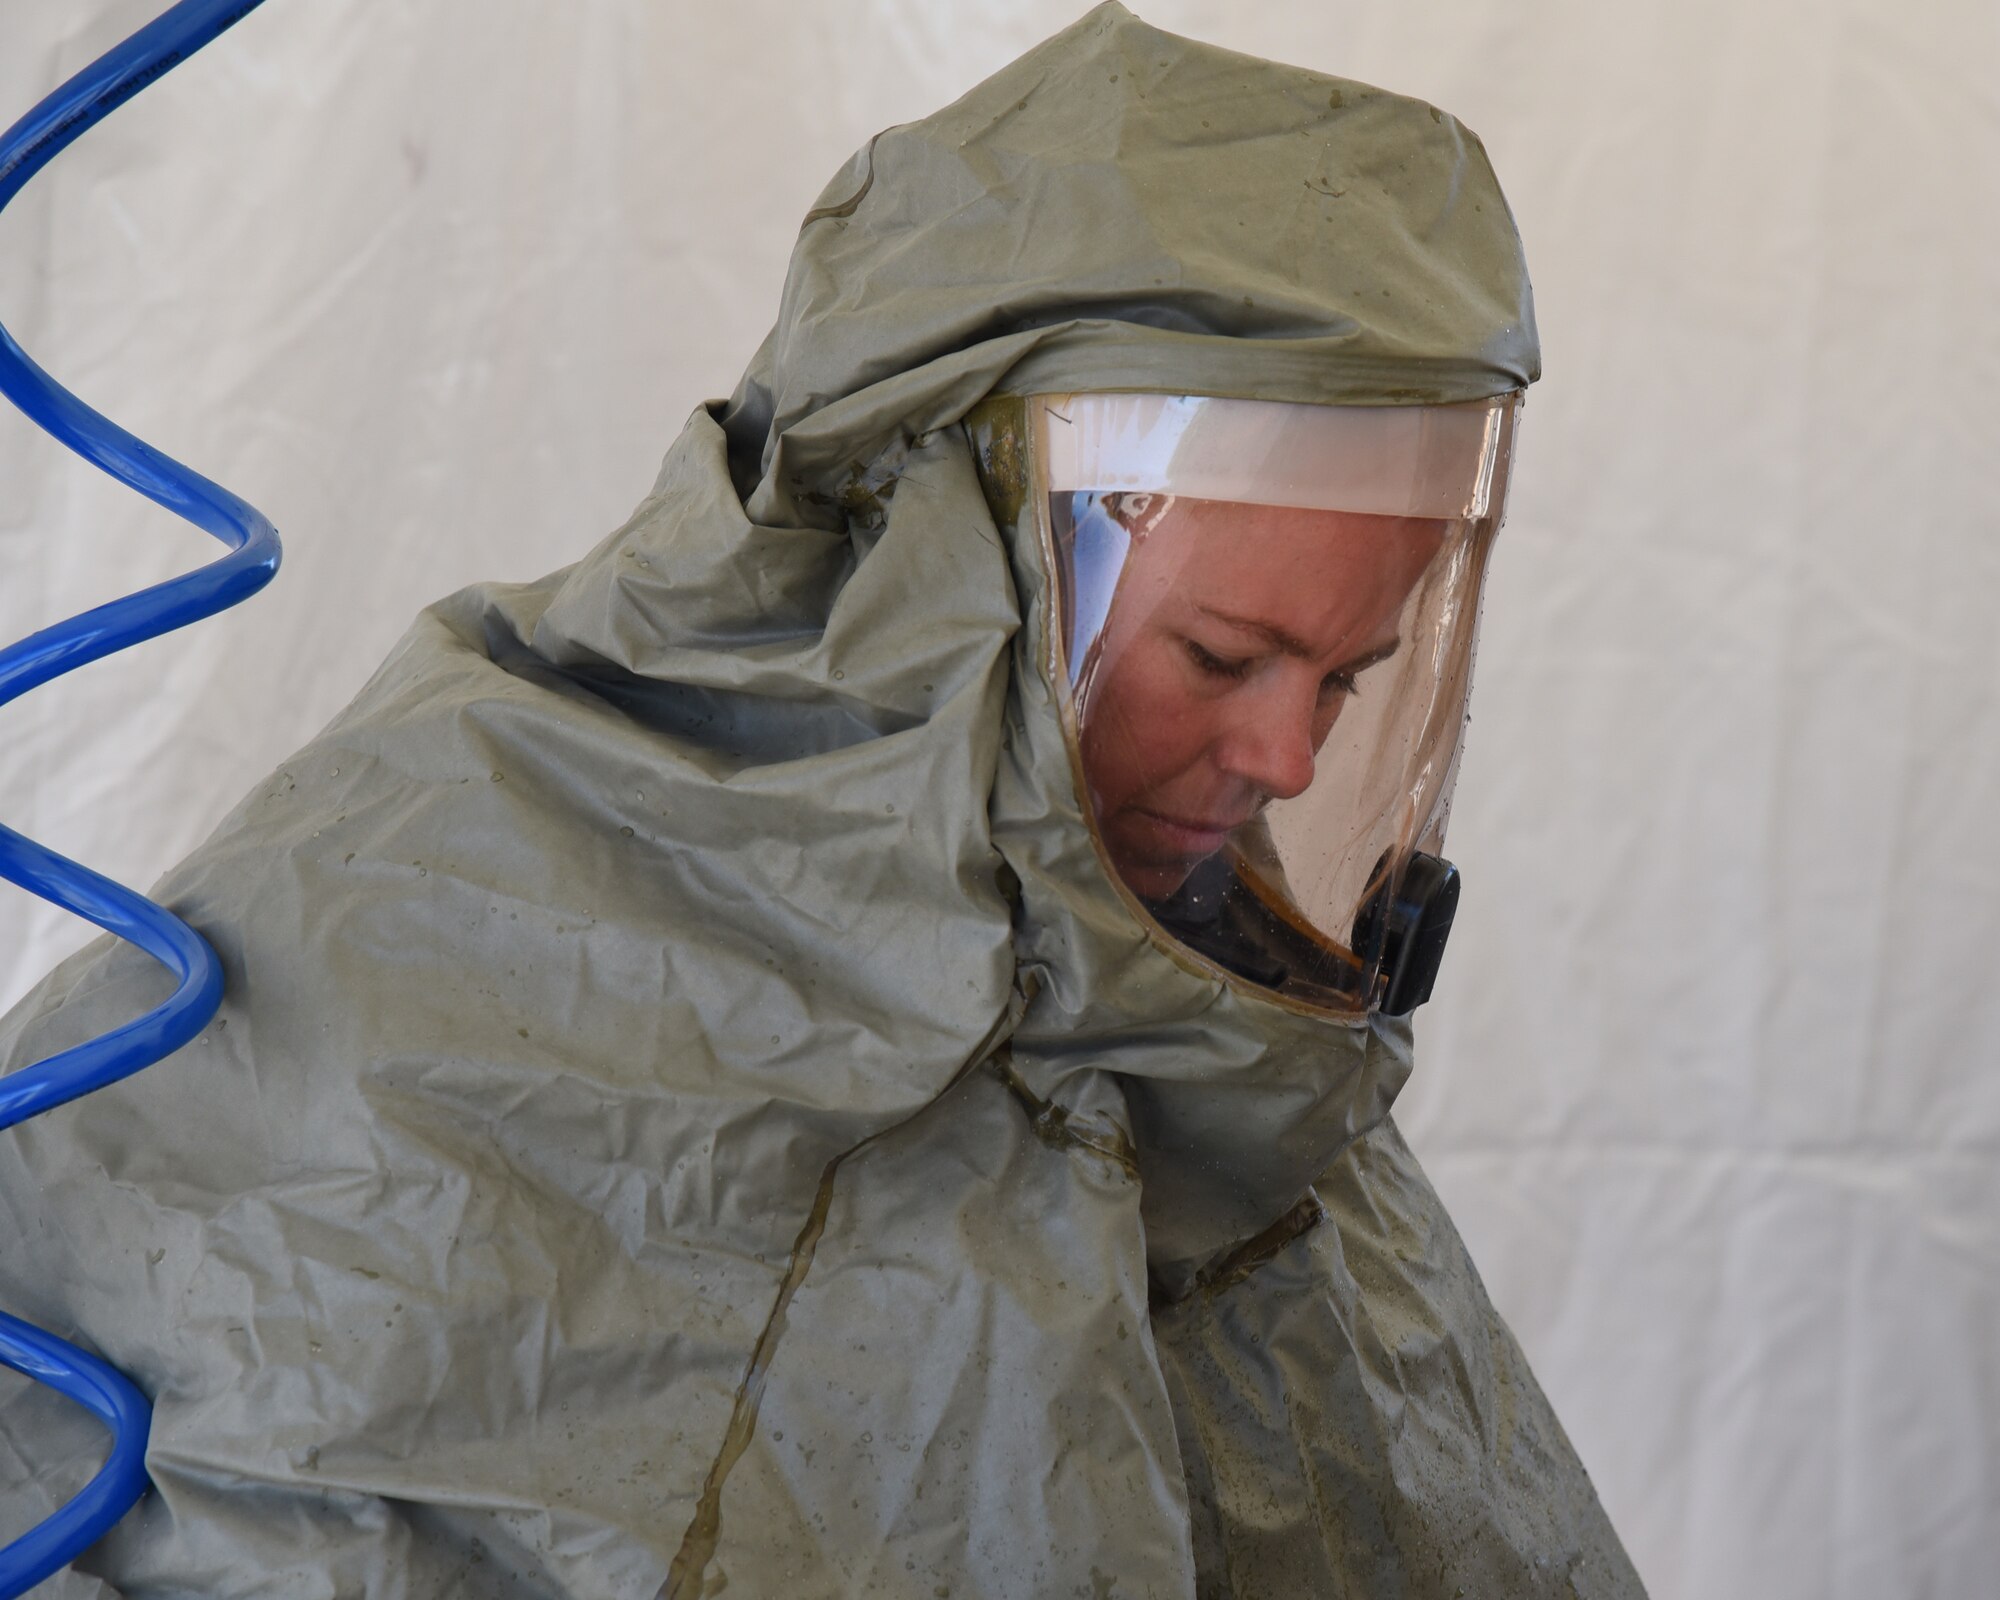 Tech. Sgt. Charity Stuart, an In-Place Patient Decontamination team member, processes a patient through an IPPD station during an exercise at the Goldwater Air National Base, May 22. The purpose of the exercise was to train and evaluate the IPPD team's ability to receive and decontaminate patients in preperation to be elivated to a higher level of medical care. (U.S. Air National Guard photo by Staff Sgt. Wes Parrell)